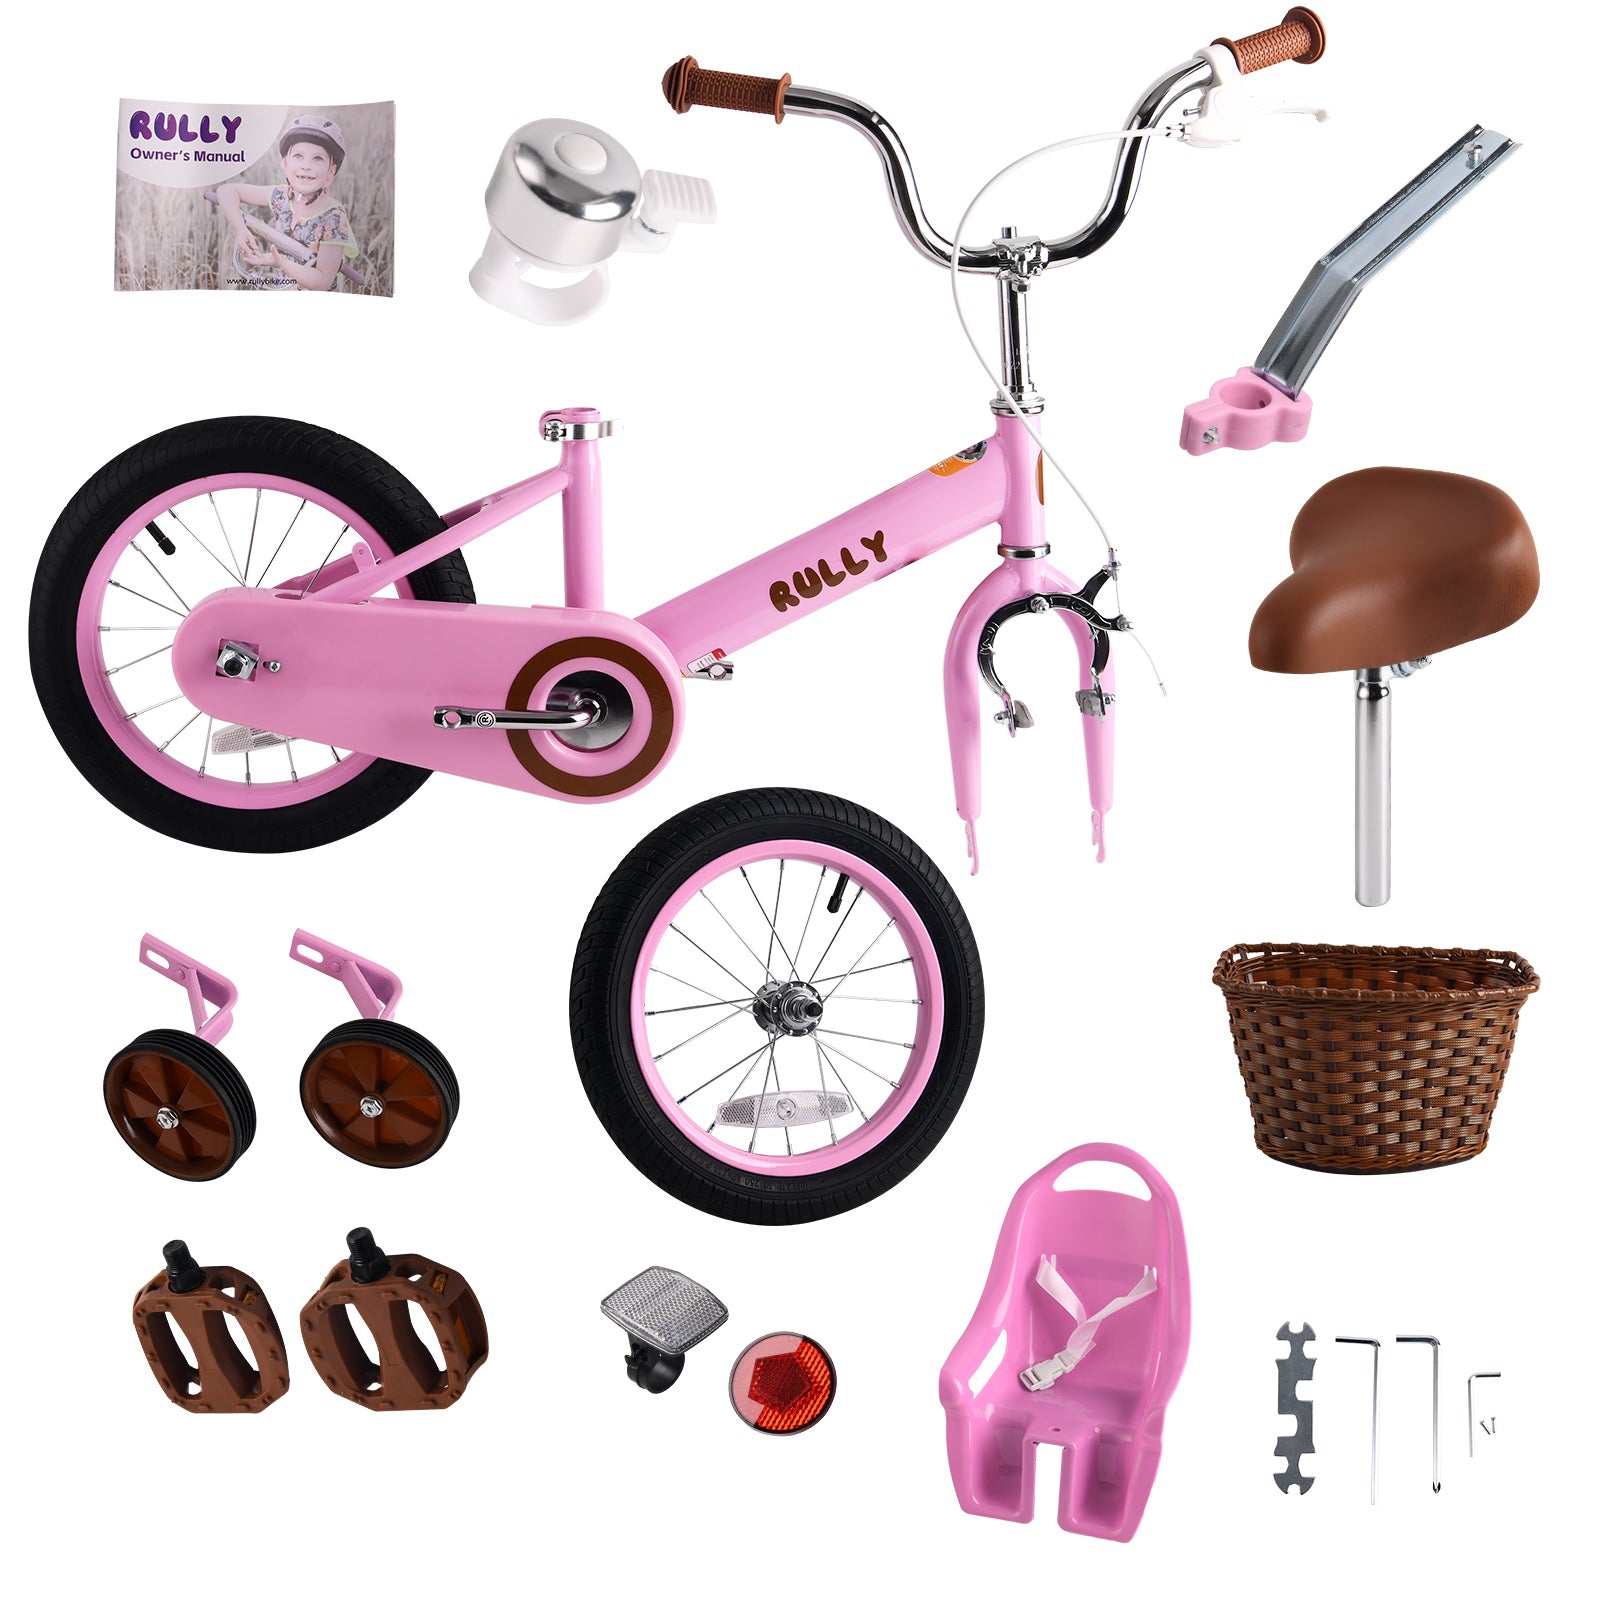 RULLY Retro Kids Bike for 2-7 Years with Training Wheels & Front Handbrake